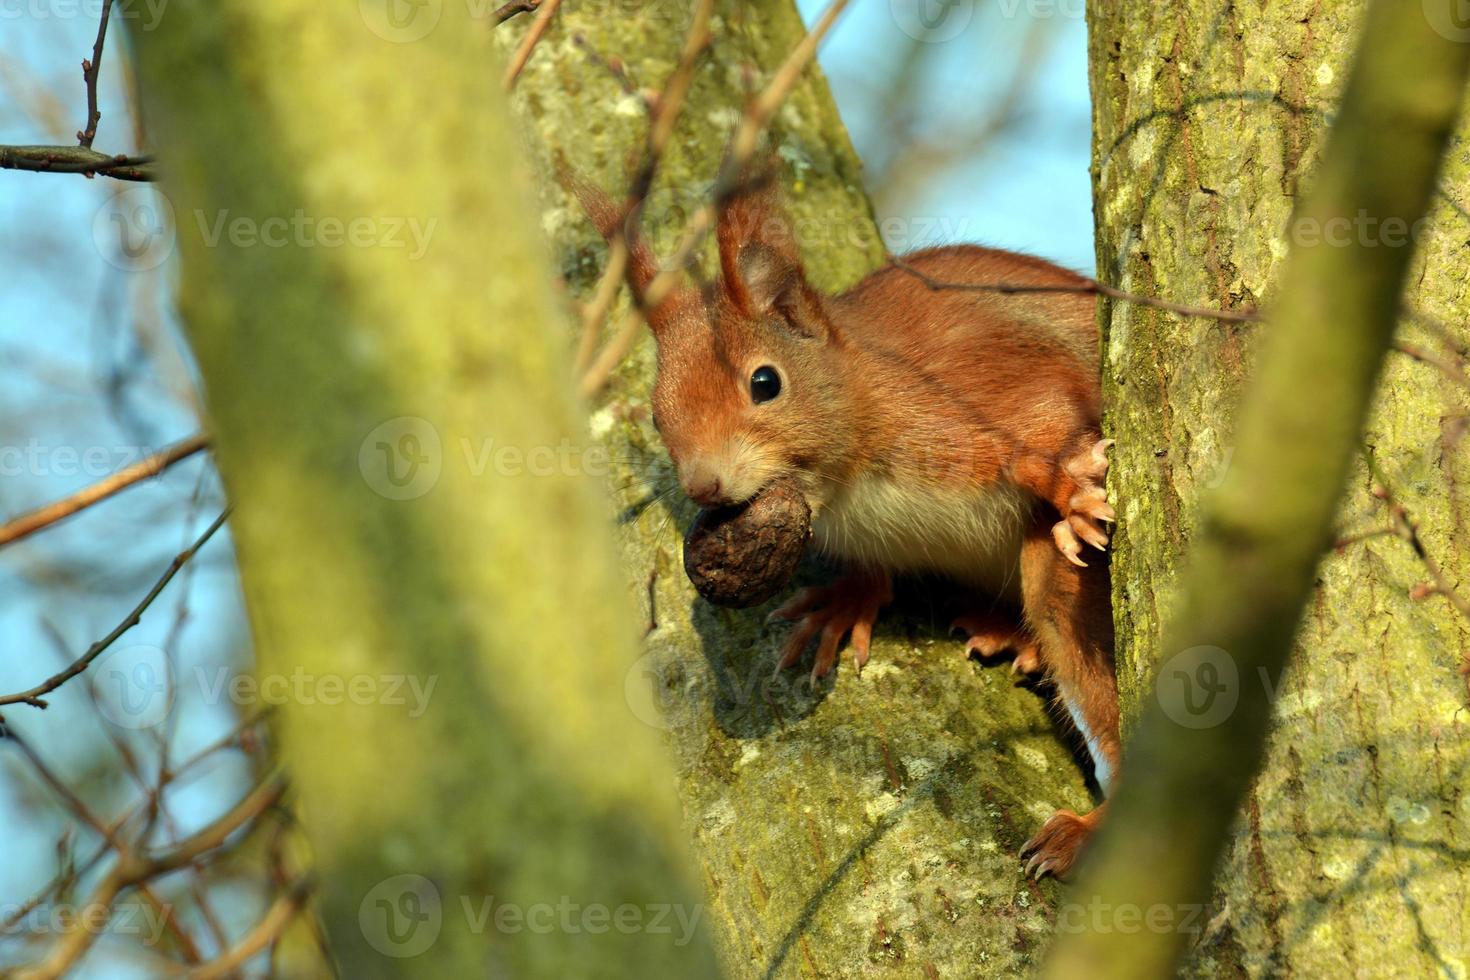 Squirrel sits with a nut in its mouth in a branch fork photo